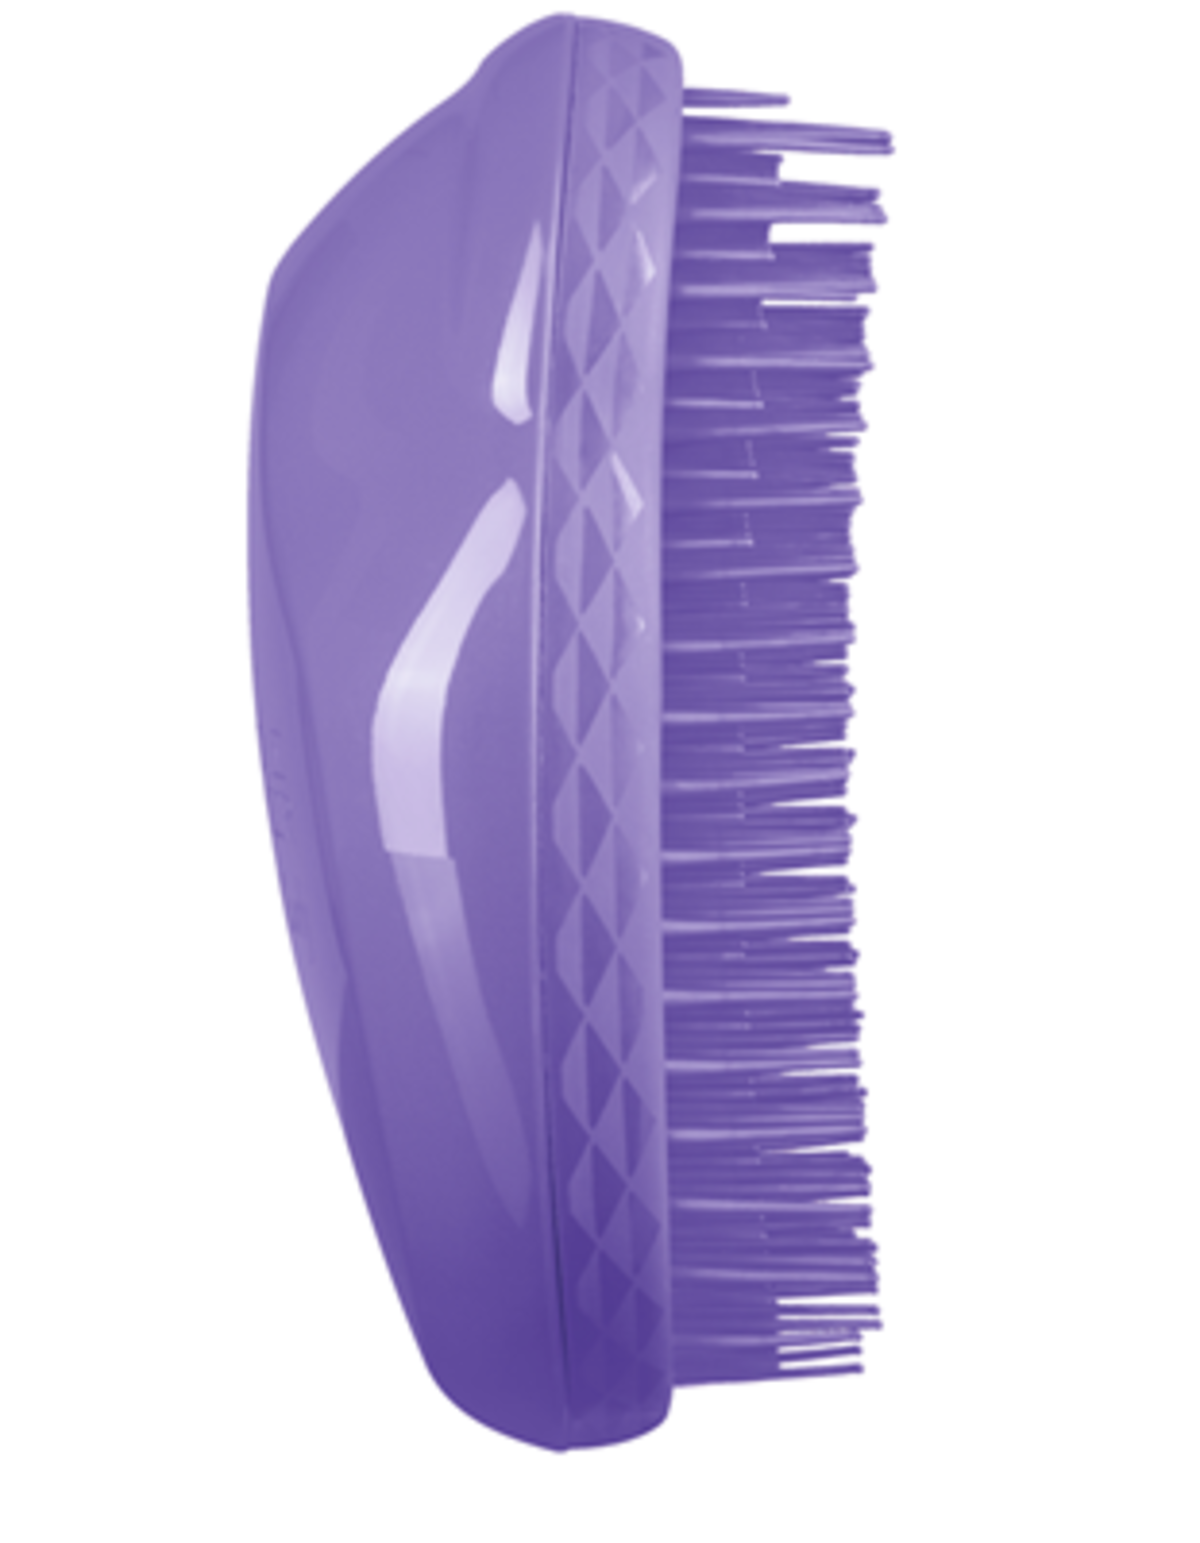 Tangle teezer Thick&Curly